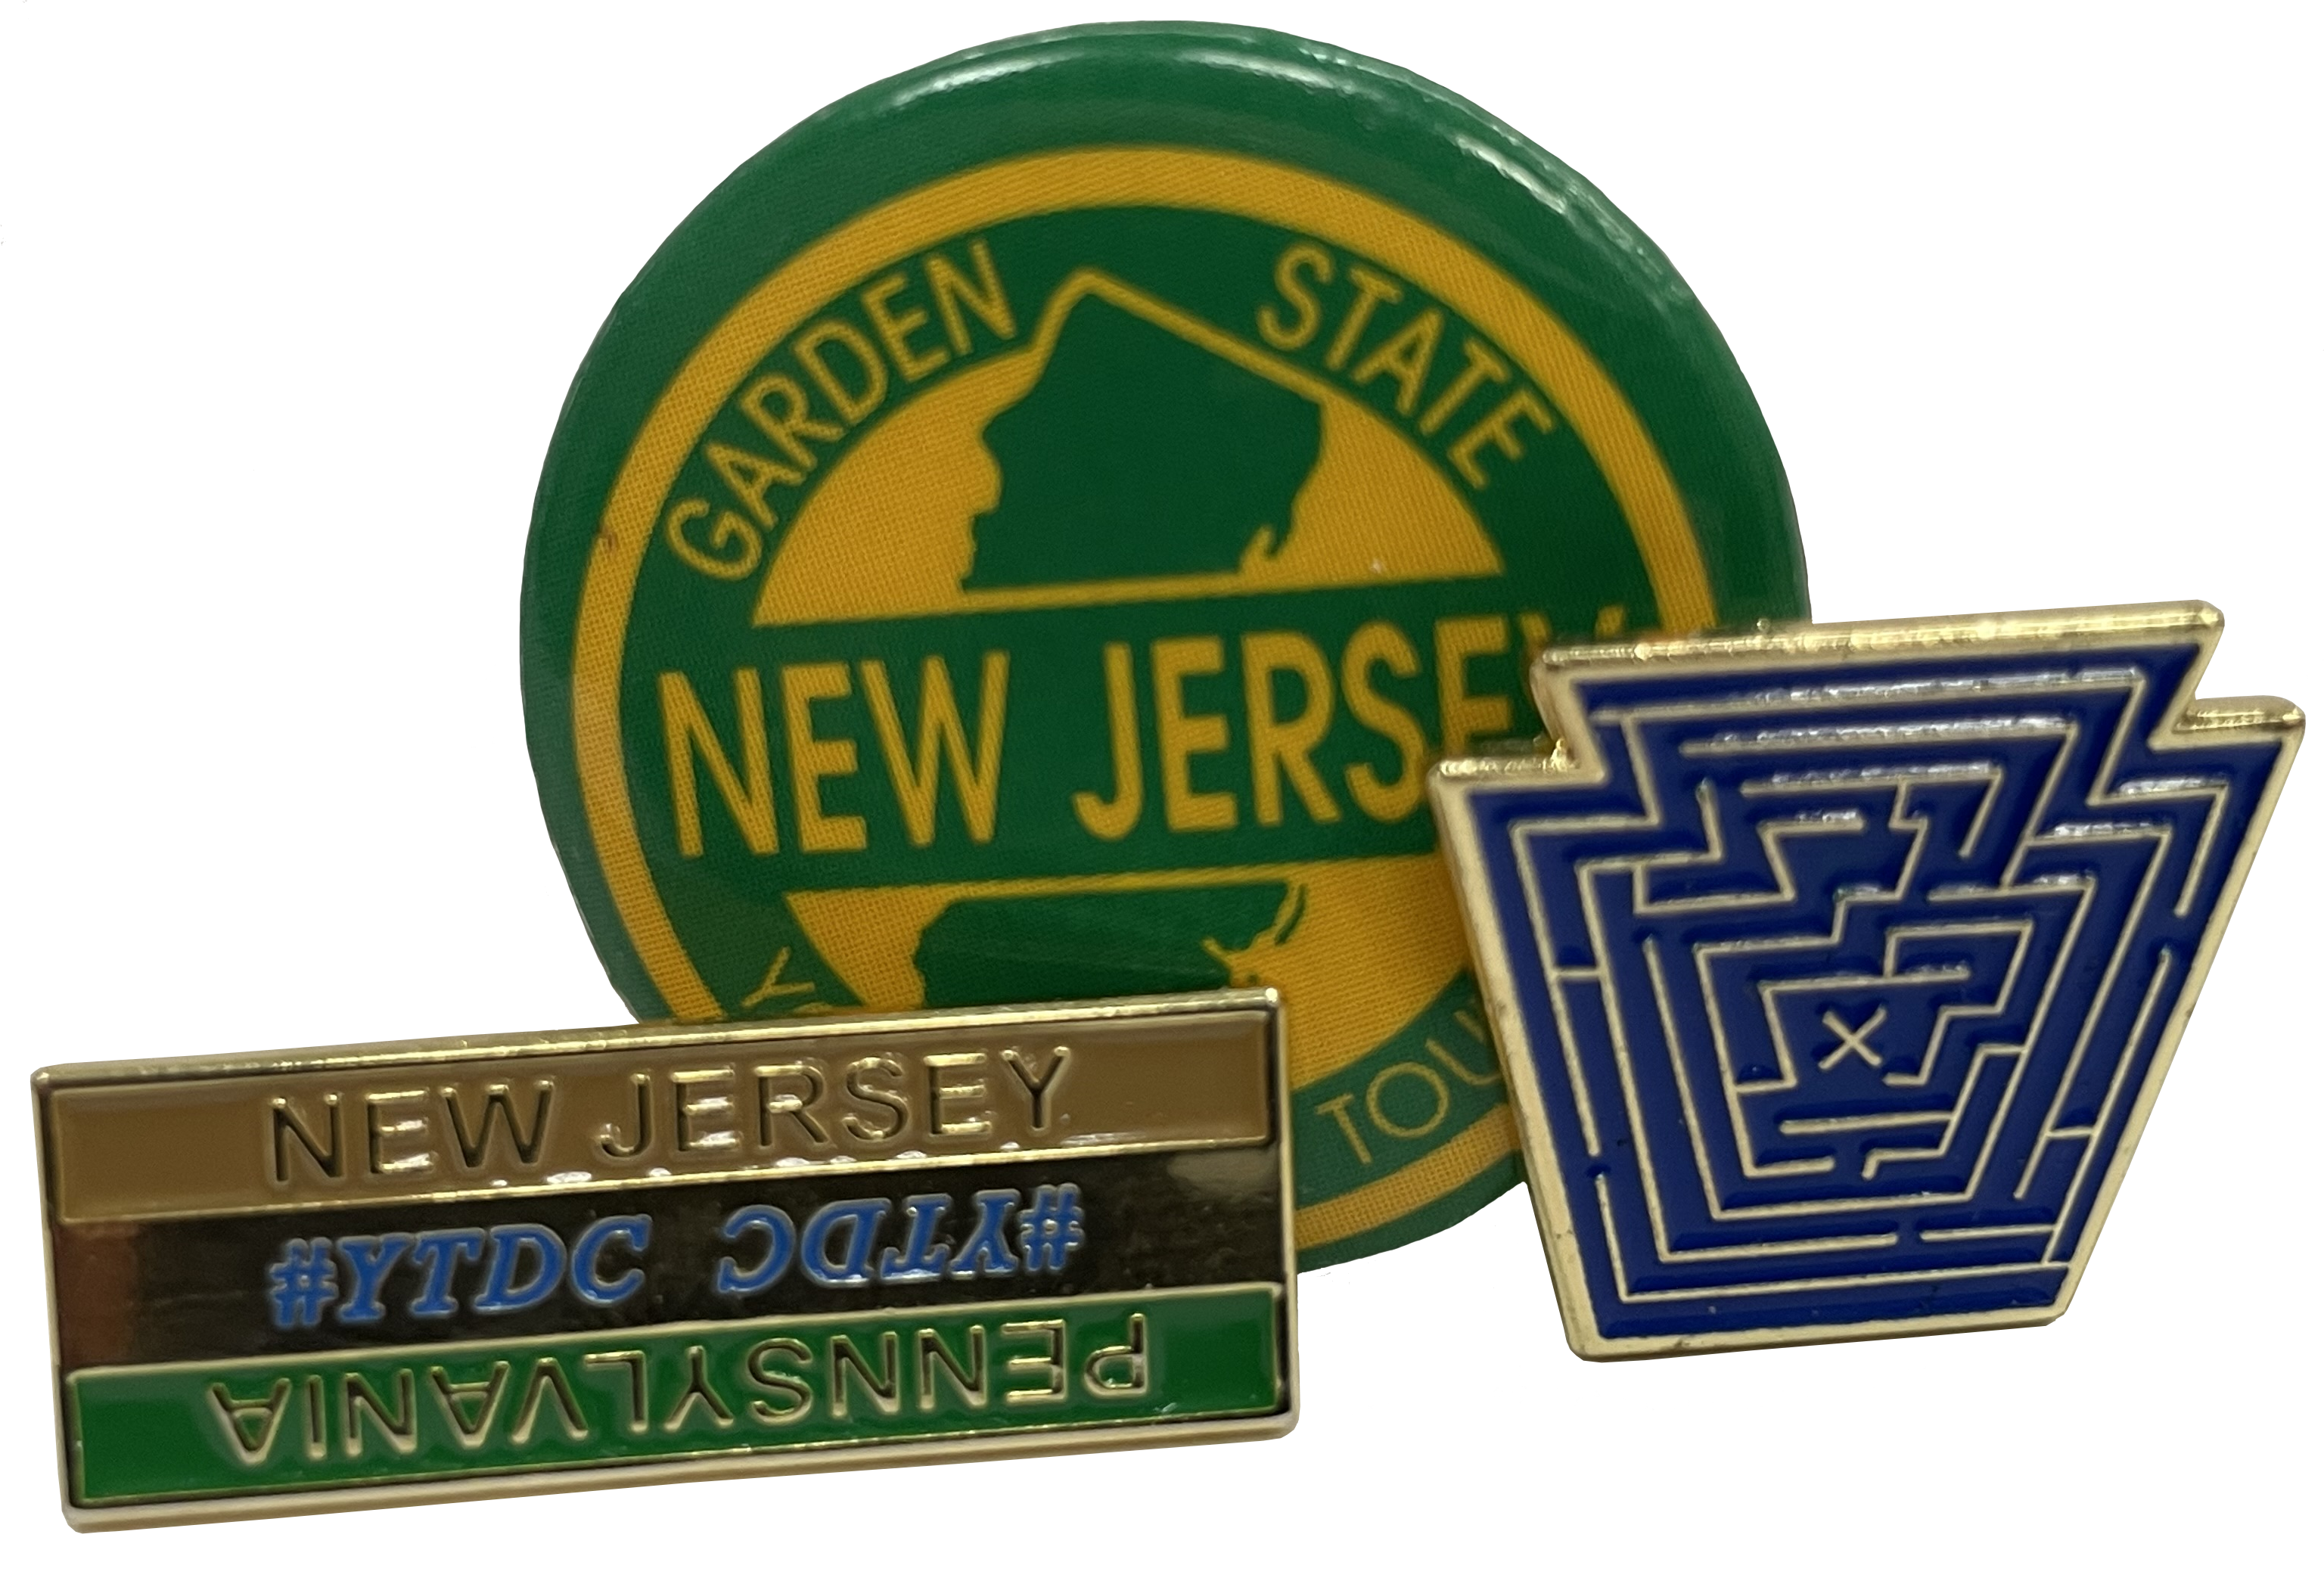 Pictured: Pins from Youth Tour (A NJ pin, a Pennsylvania pin, and an NJ/PA pin)